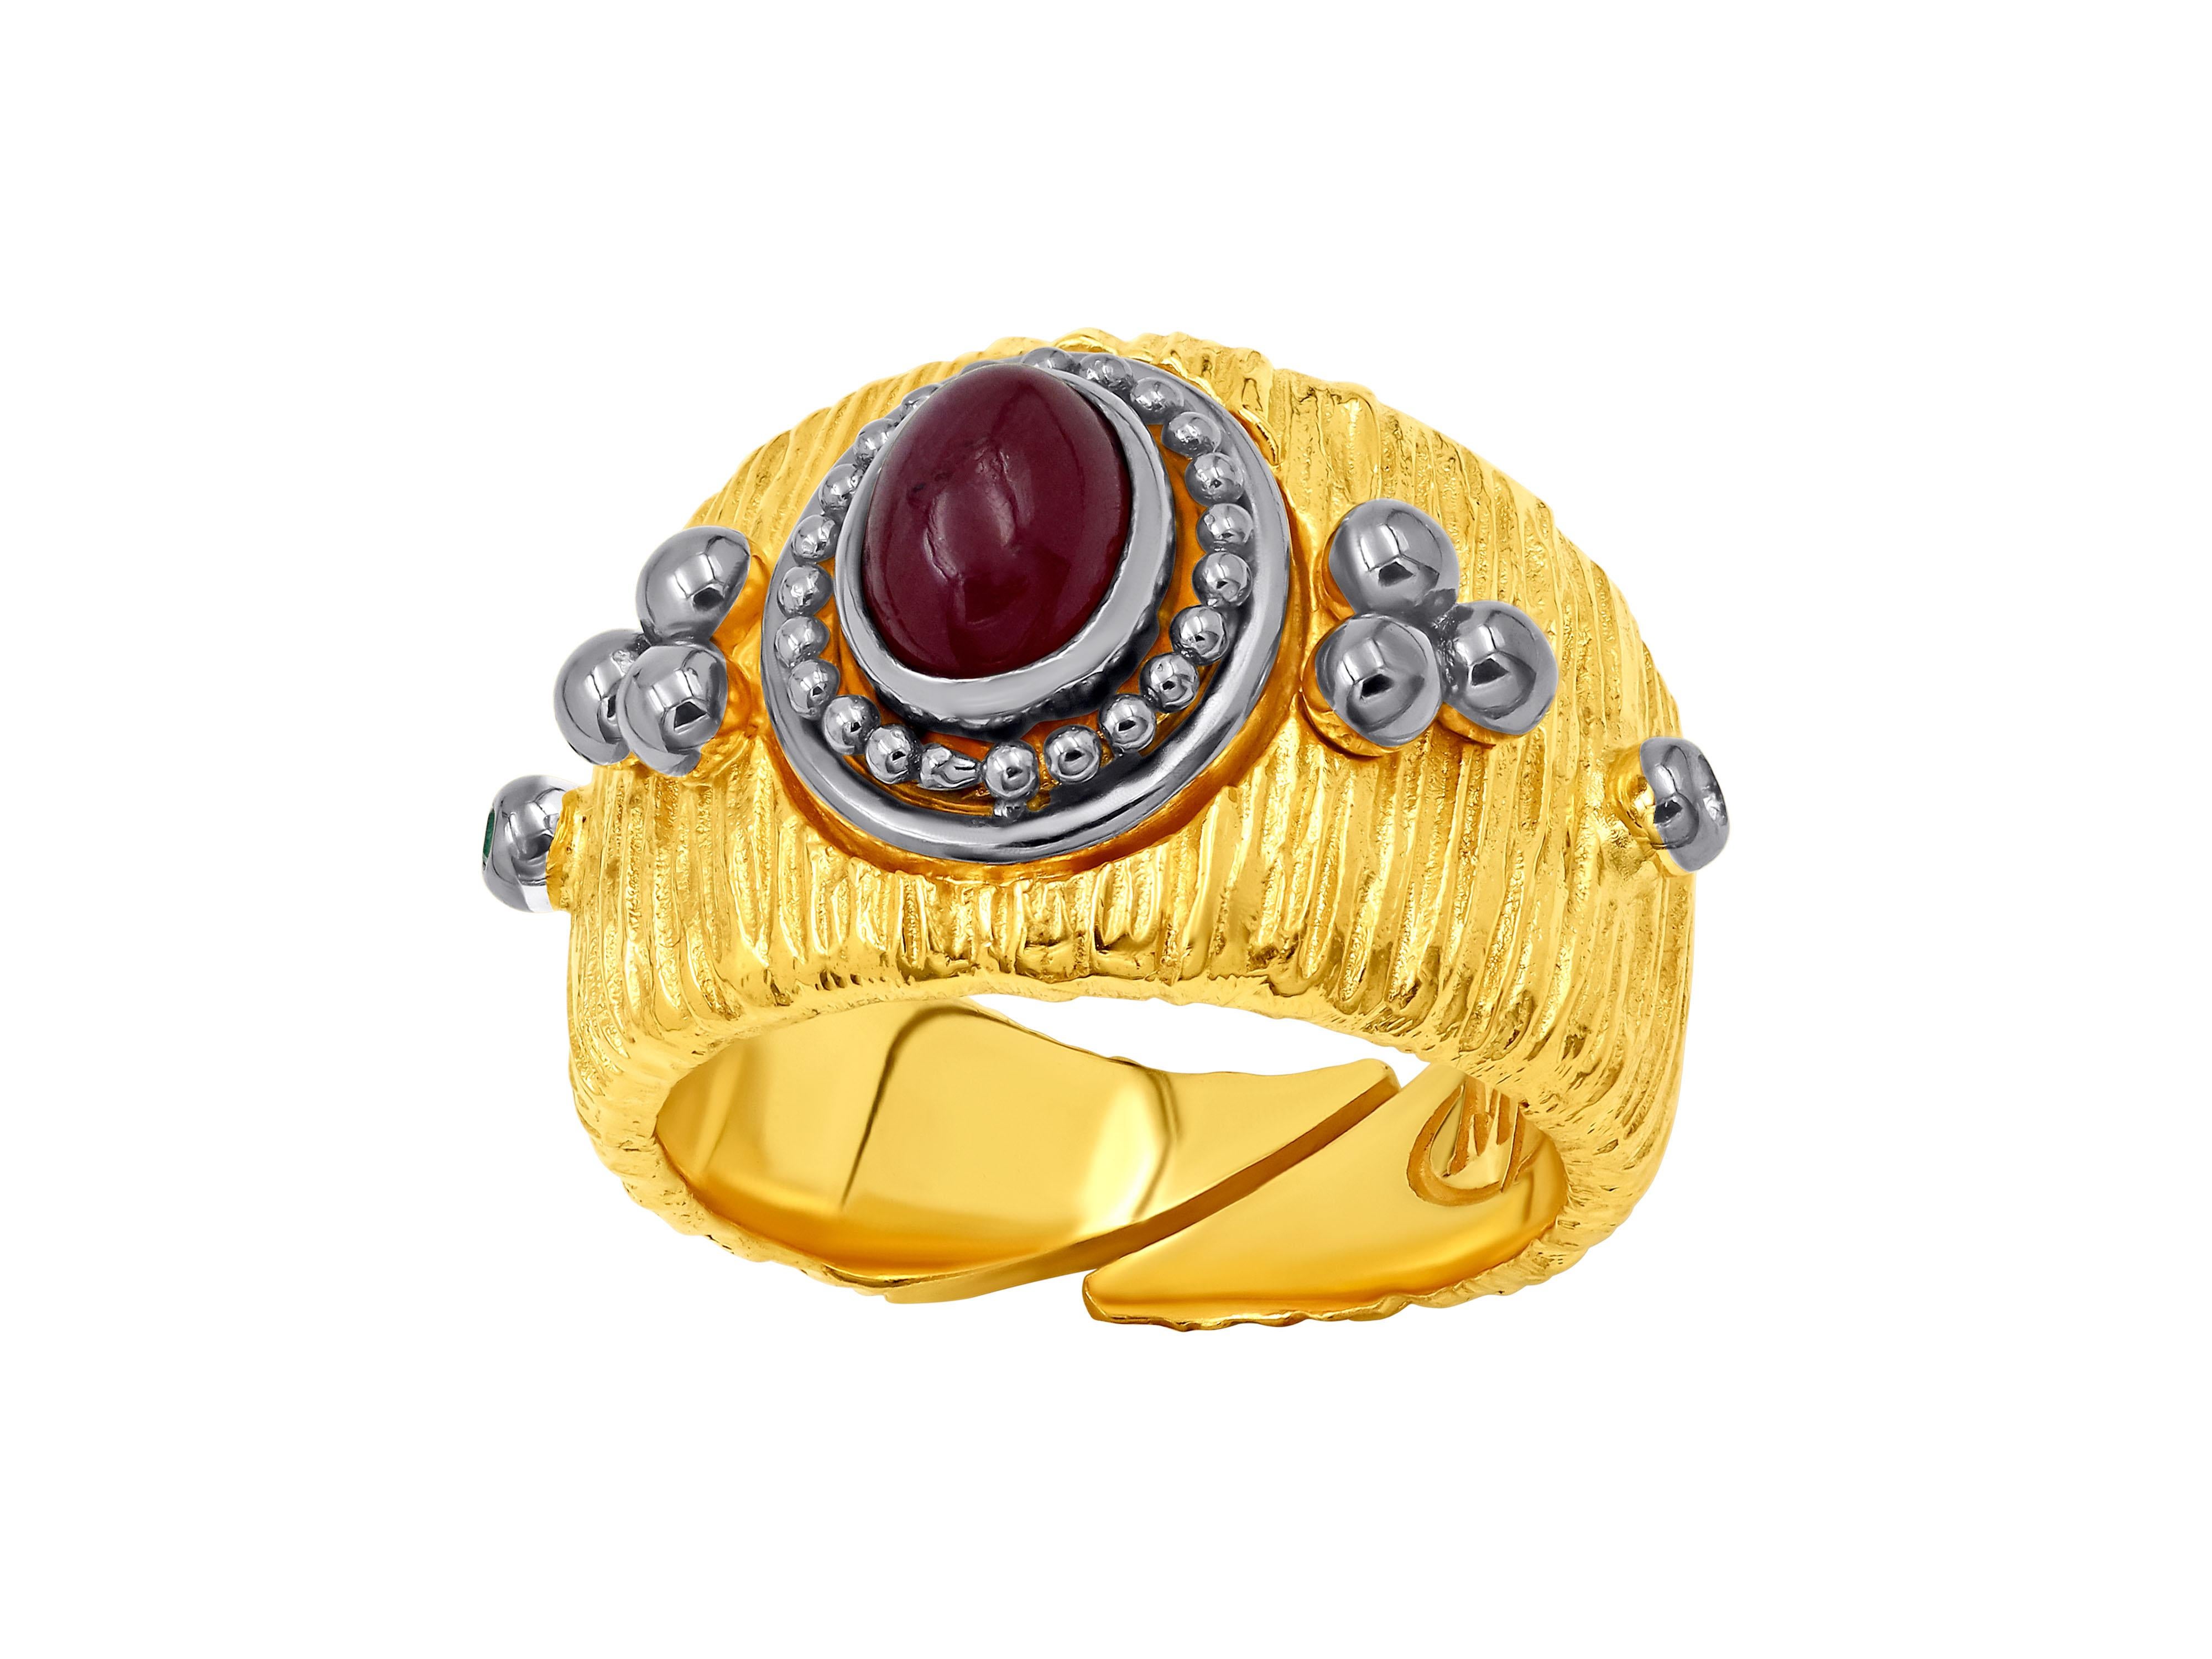 Silver gold-plated textured ring encrusted with a magnificent combination of tourmaline, emerald, and citrine gemstones. The ring showcases an exquisite design with intricate golden texture. The central attraction of the ring is a stunning, red